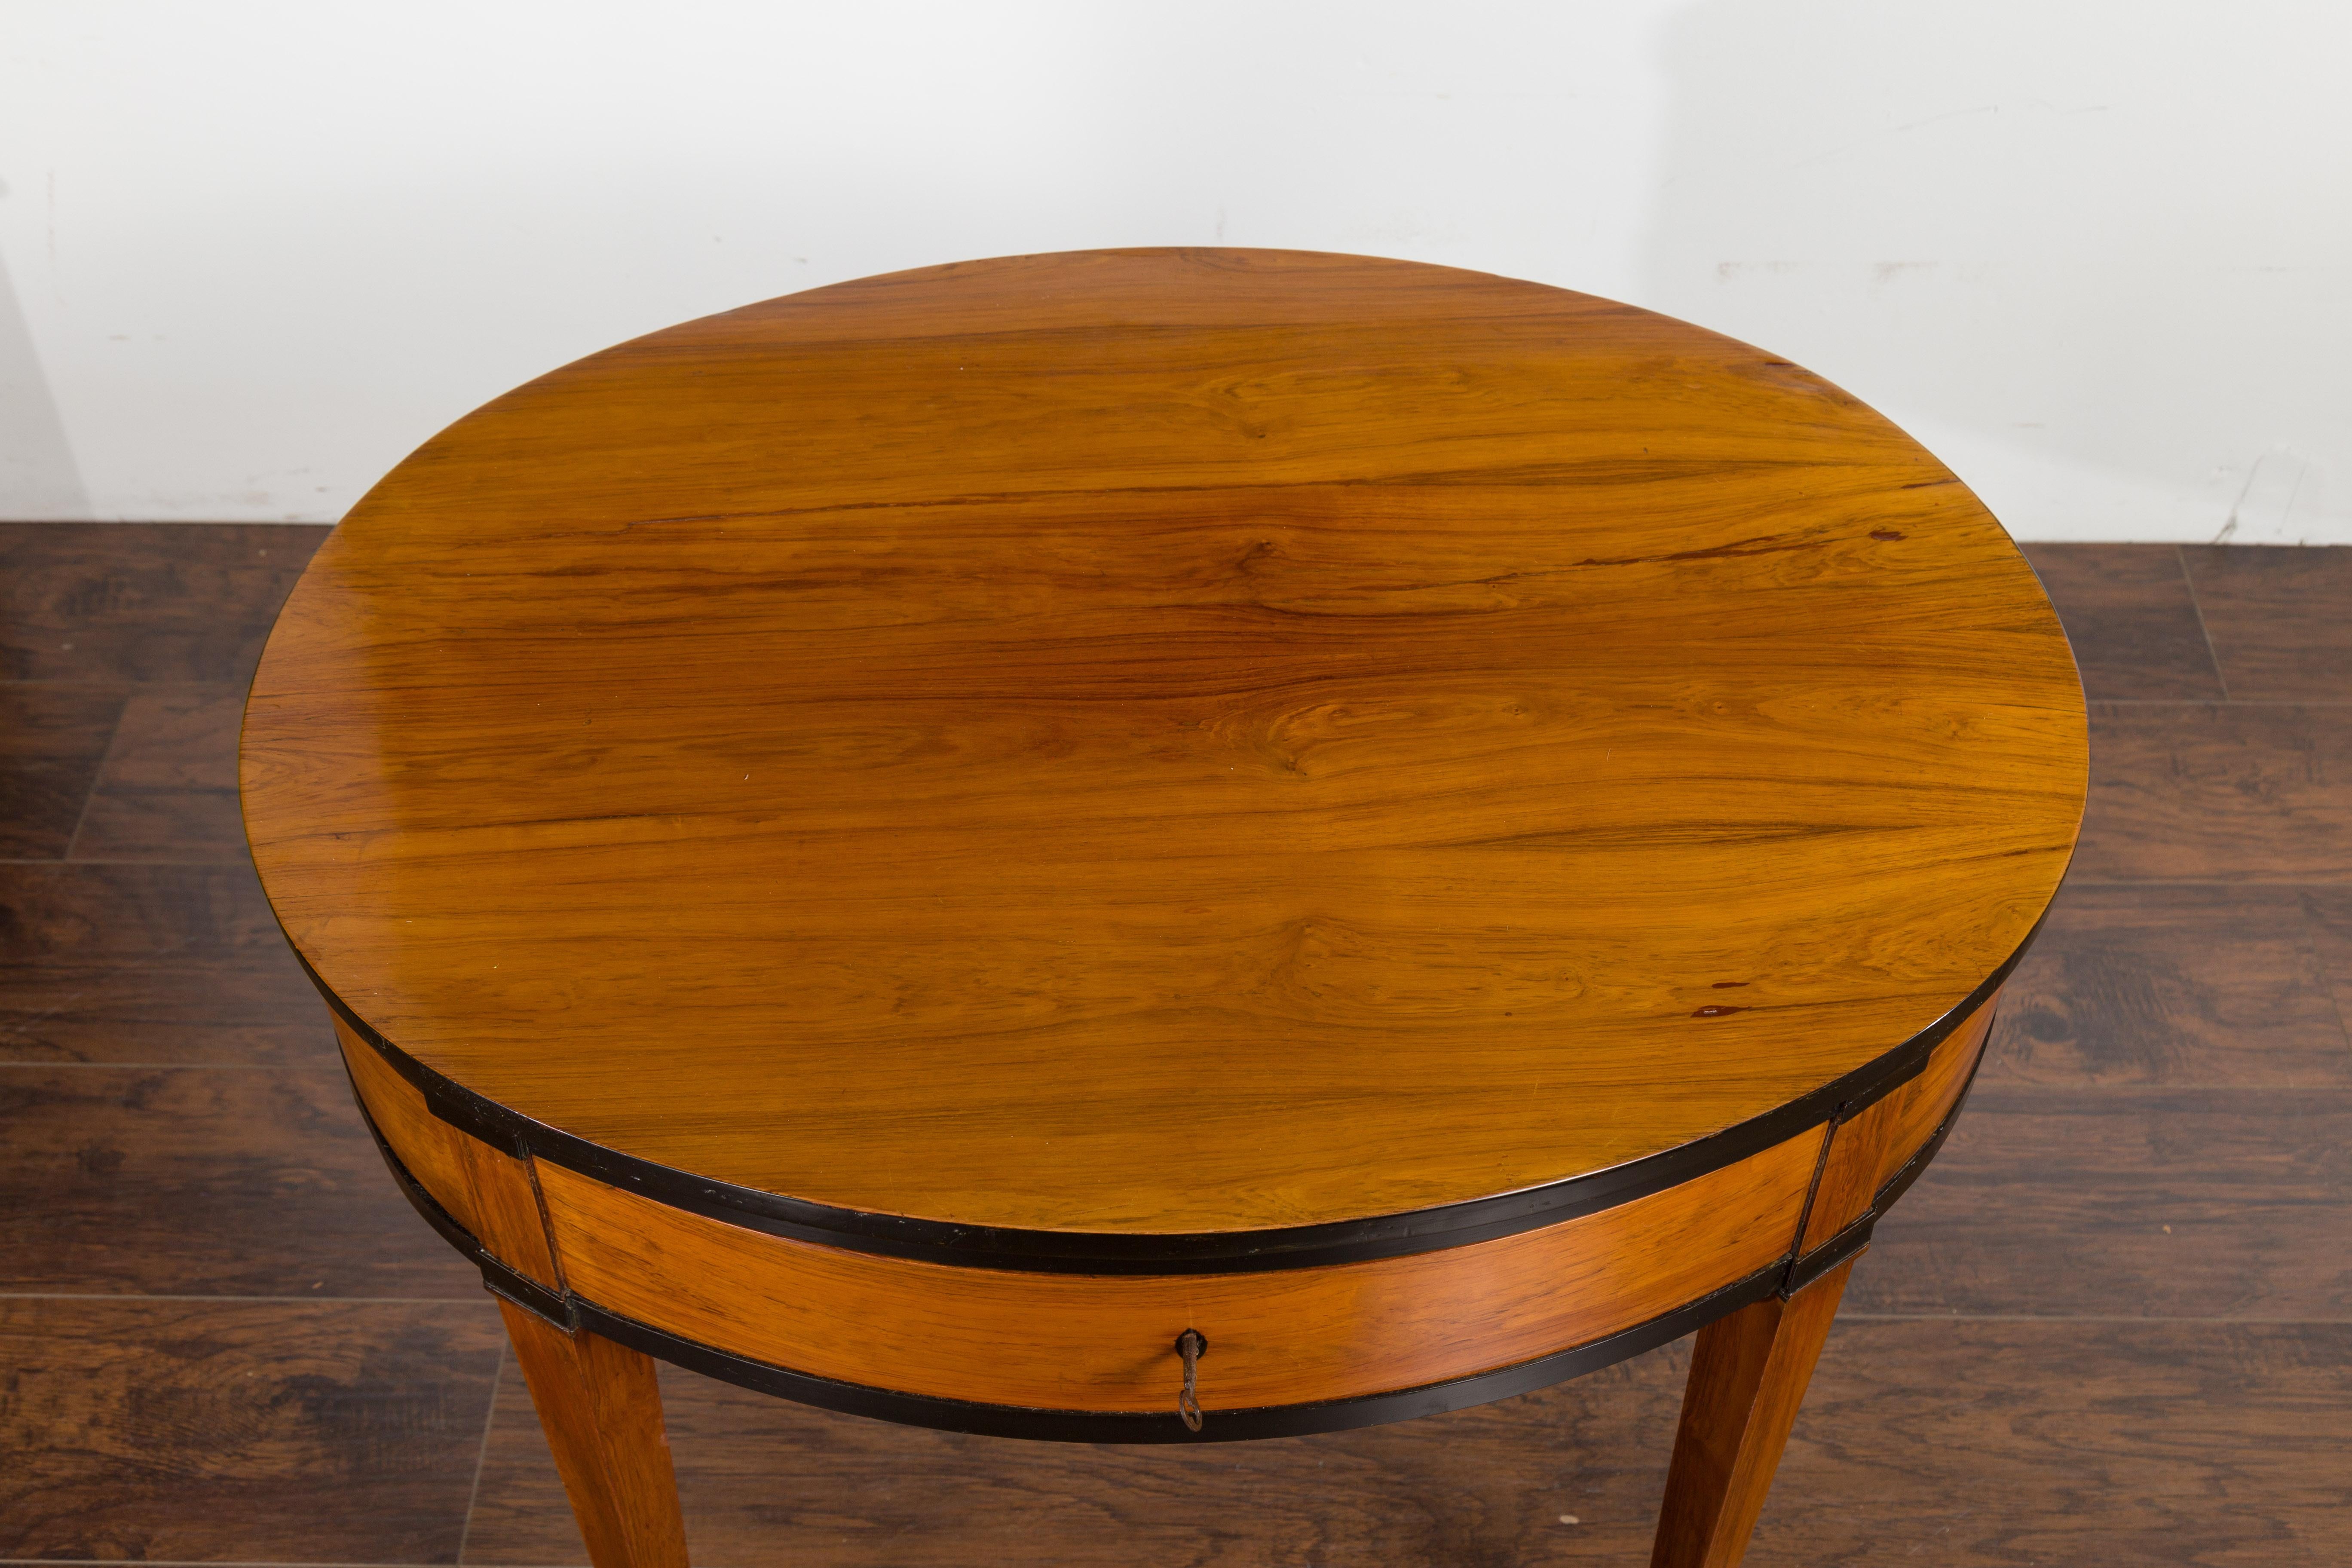 Brass Austrian 1840s Biedermeier Oval Top Table with Drawer and Ebonized Accents